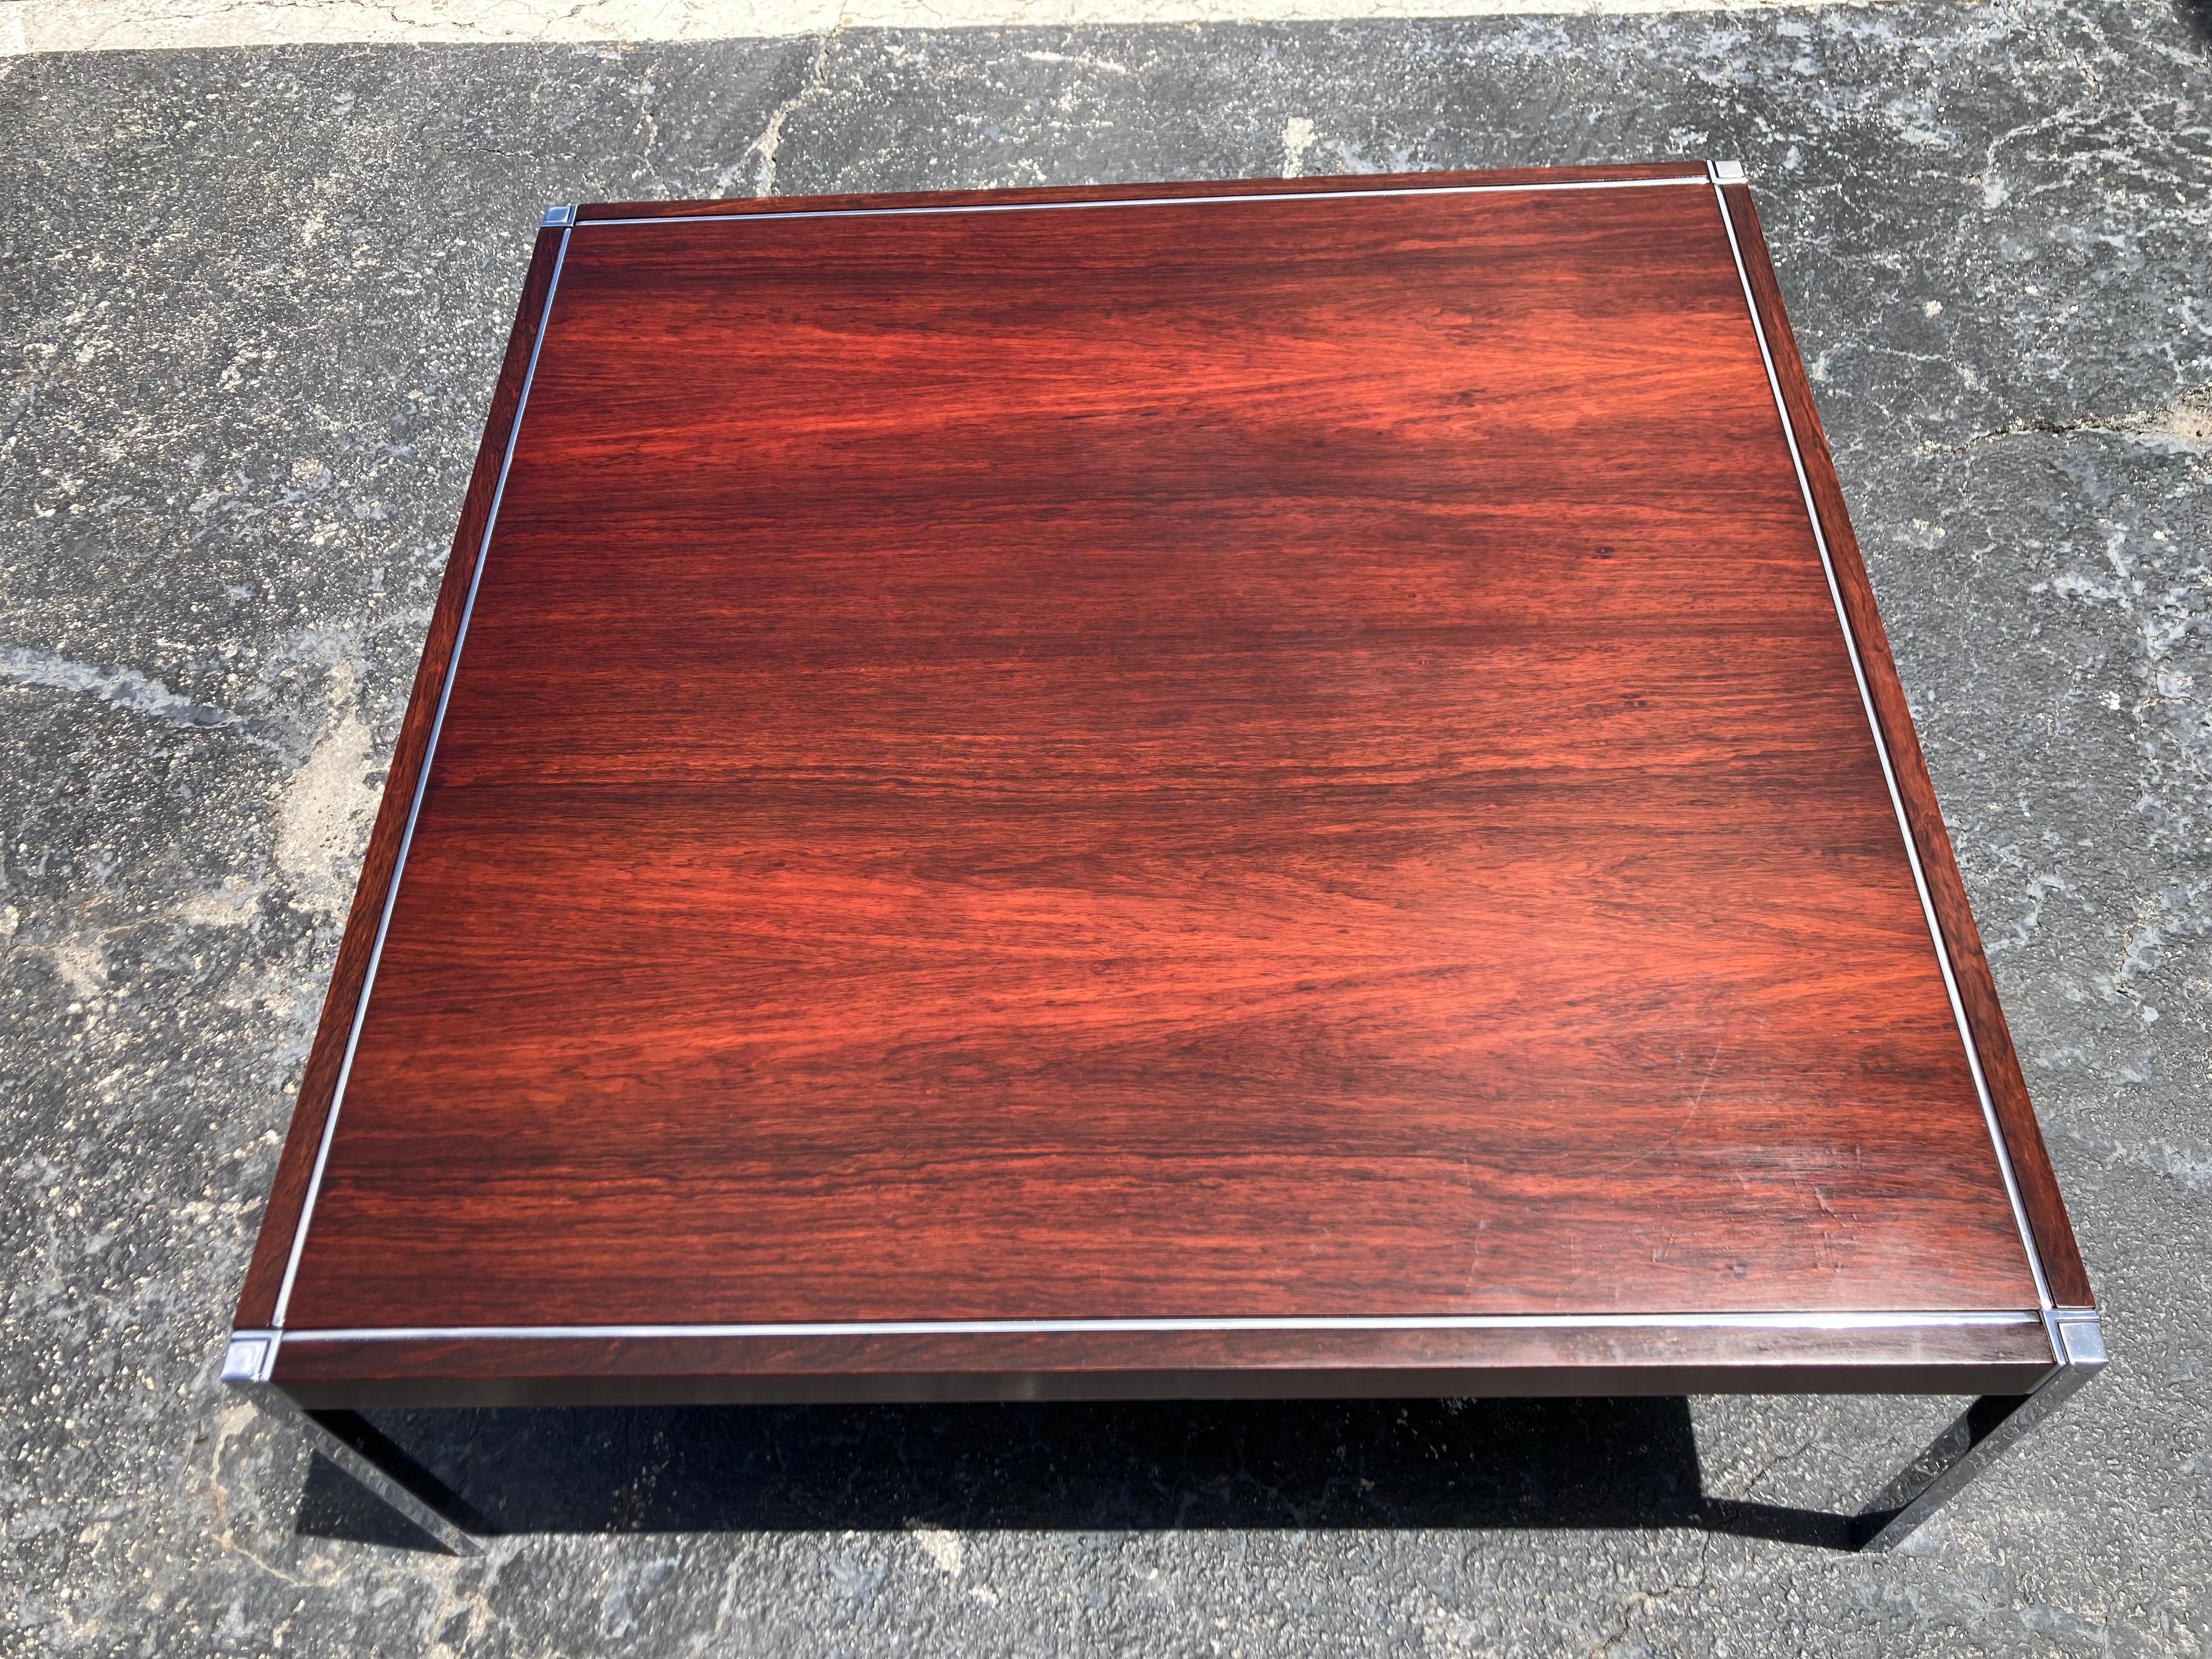 Original Richard Schultz Rosewood Coffee Table for Knoll 1970s, rosewood veneered wood with chromed steel legs. Nice condition with some normal scratches and nicks. Please see all pictures.